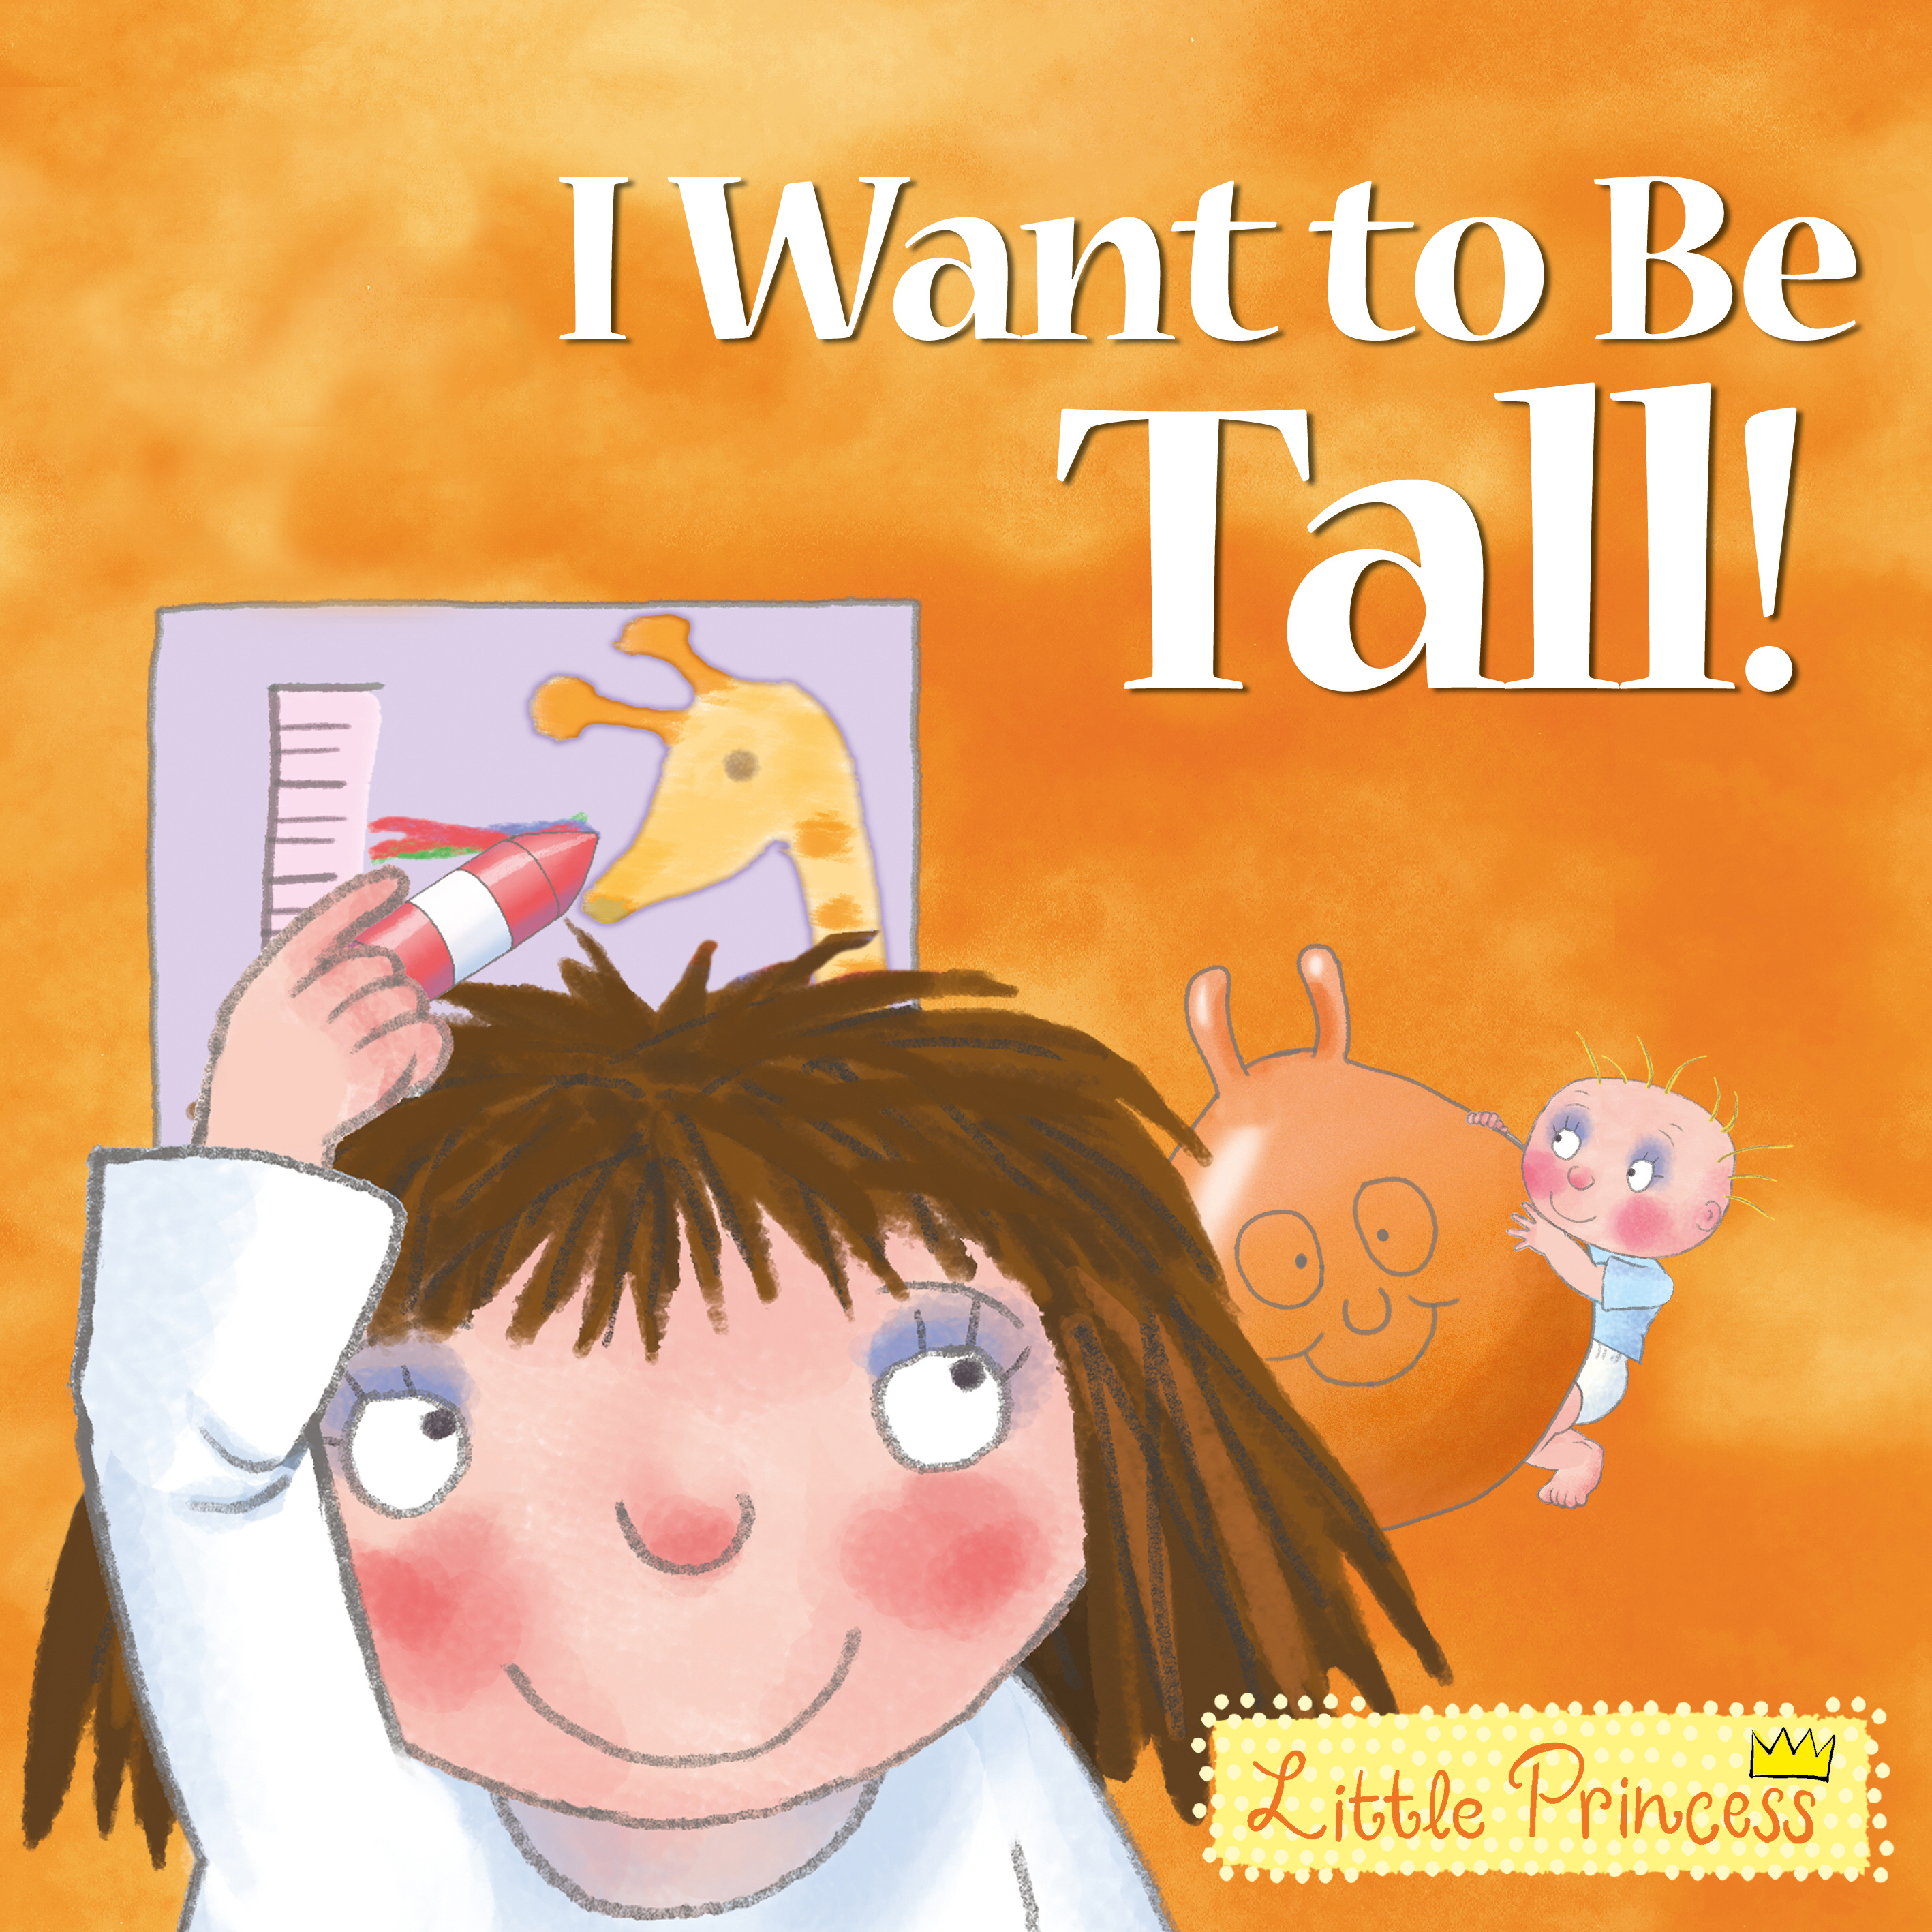 I Want to Be Tall!